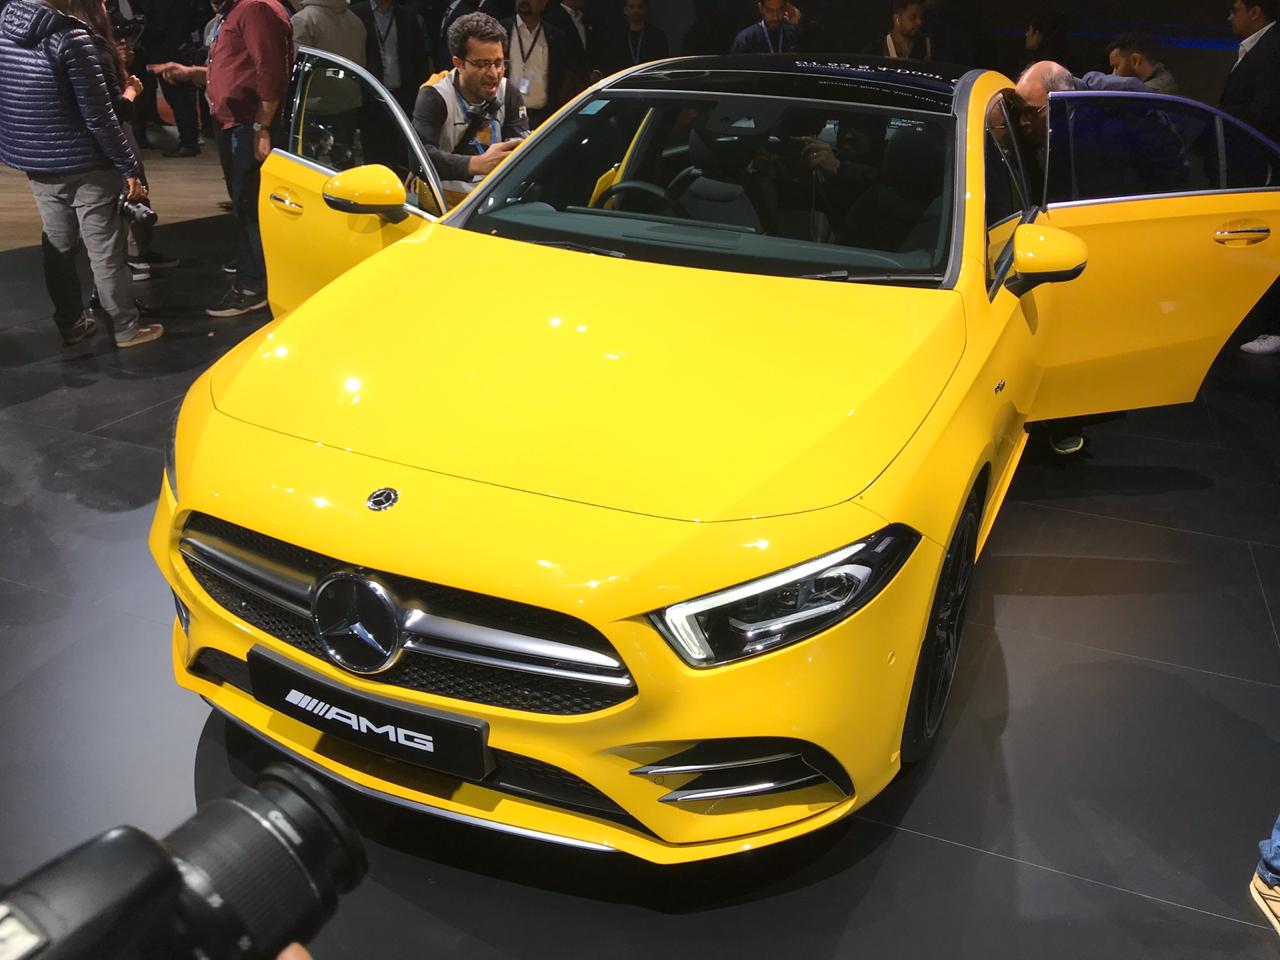 Mercedes A Class Limousine Revealed At Auto Expo To Be Priced Around Rs 40 Lakh Zigwheels